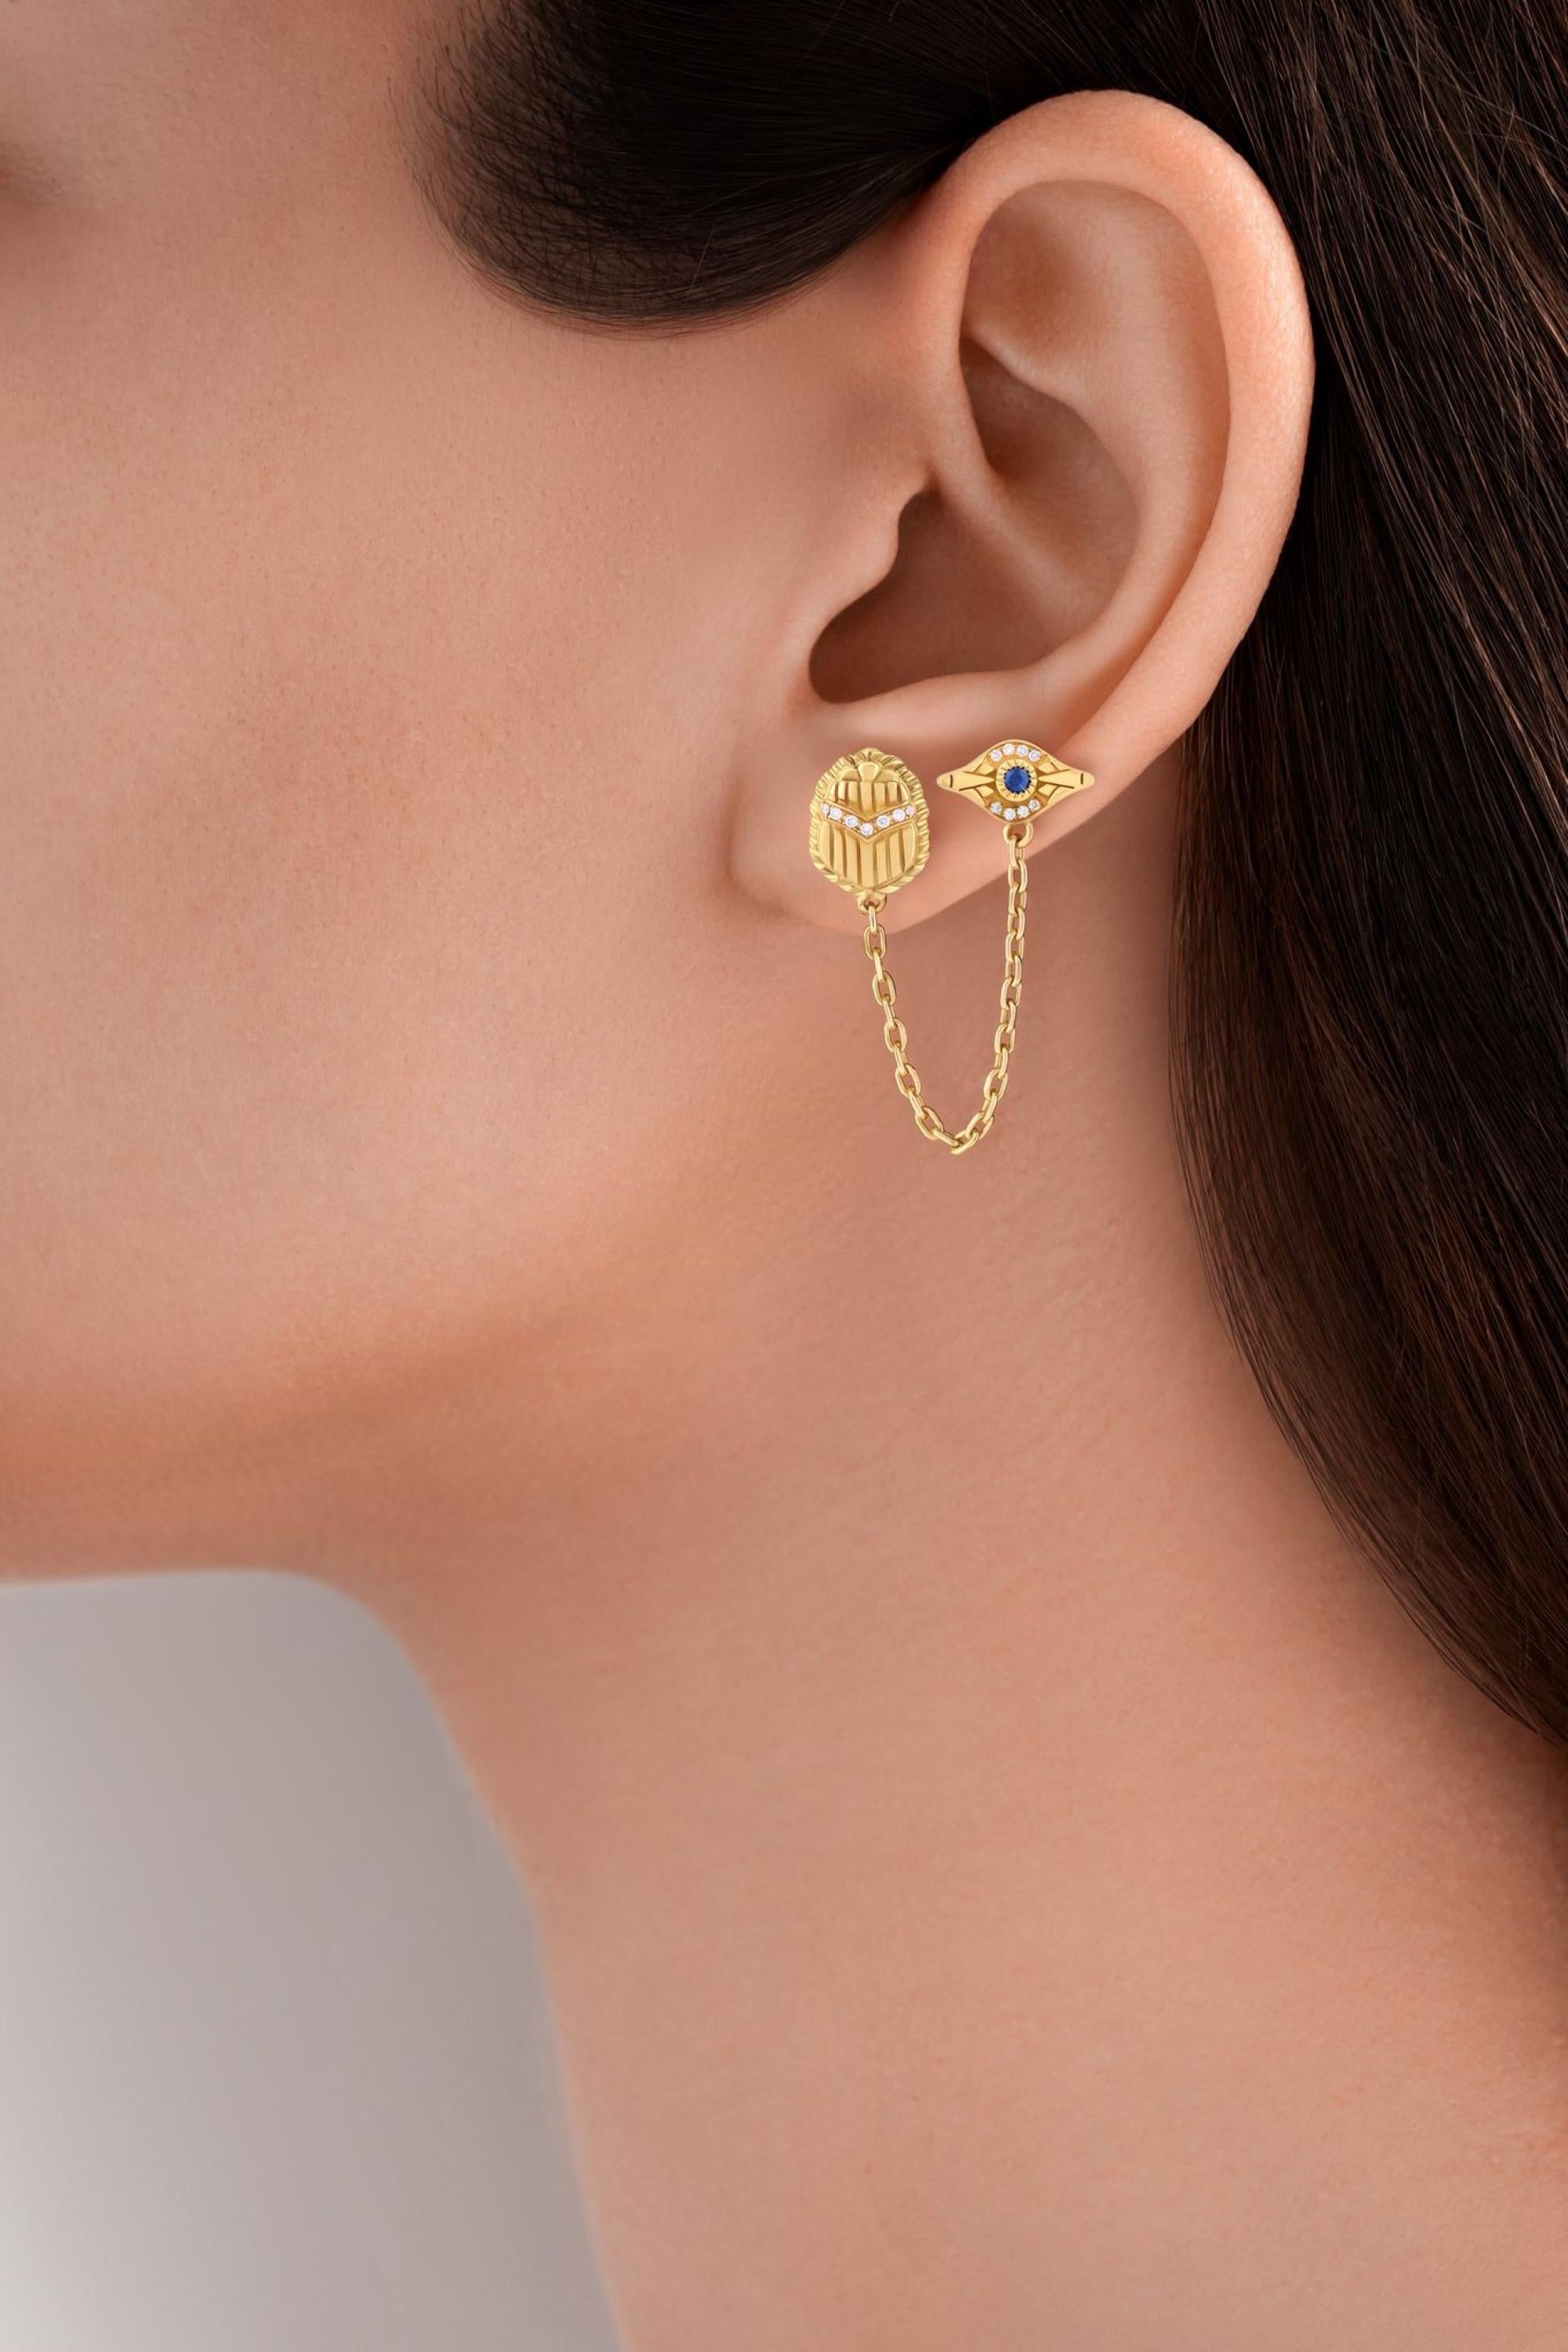 18 Karat Gold, Sapphire and Diamond Eye & Scarab Multi-pierce Chain Stud Earring. Designed to be worn in multiple piercings on one ear. Part of Azza Fahmy's 2020 Egyptomania Collection.

Sapphire: 0.05 carats (Total weight)
Diamond: 0.06 carats